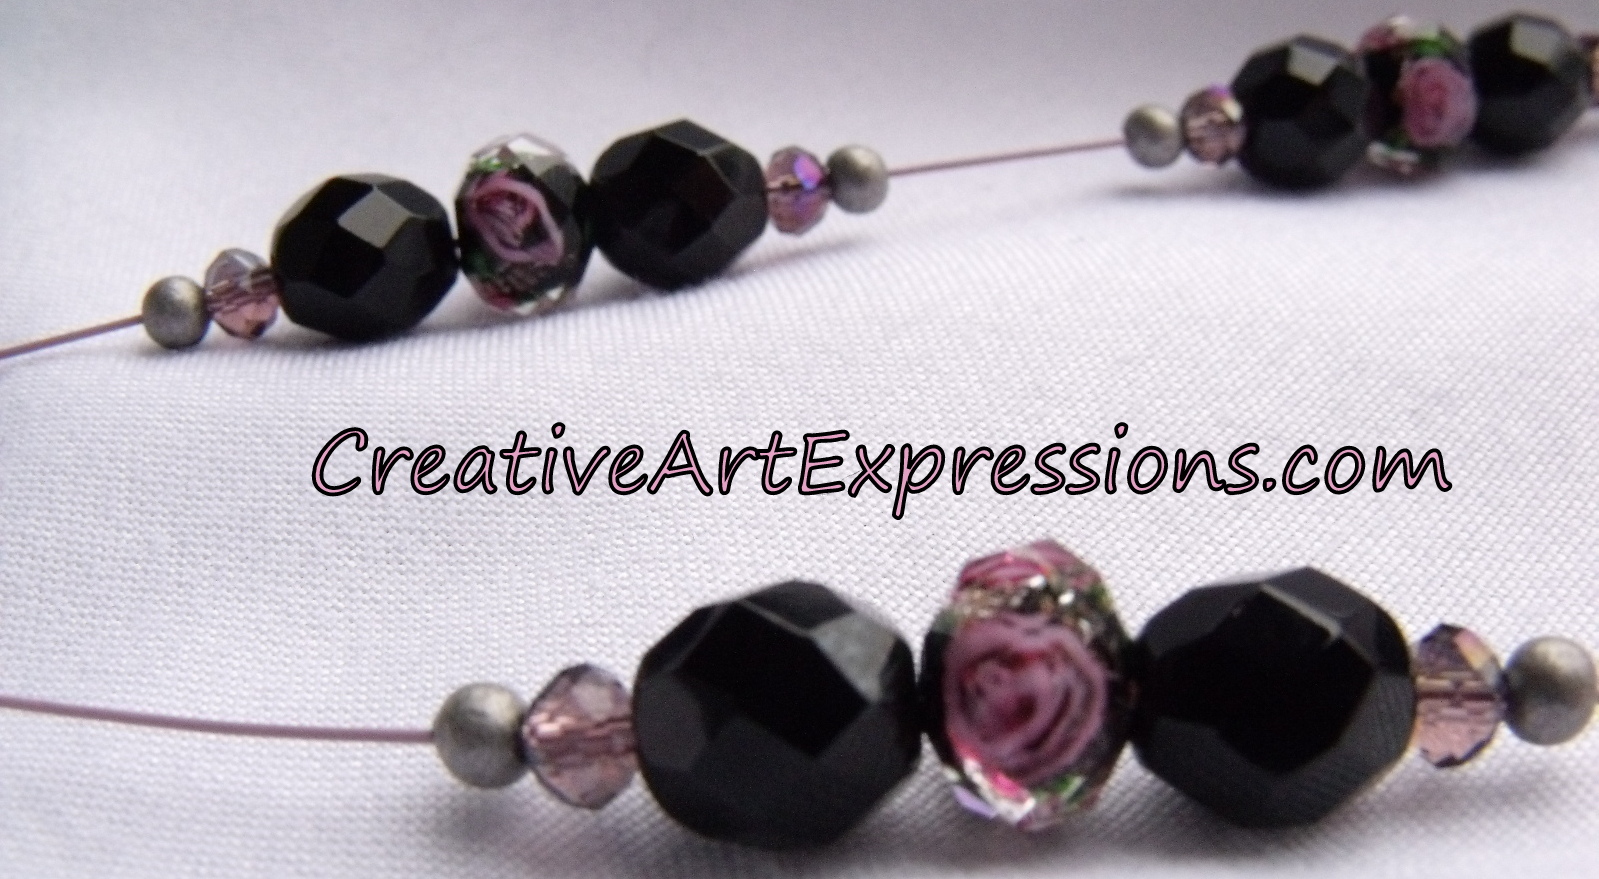 Creative Art Expressions Handmade Black & Pink Heart Necklace Jewelry Design